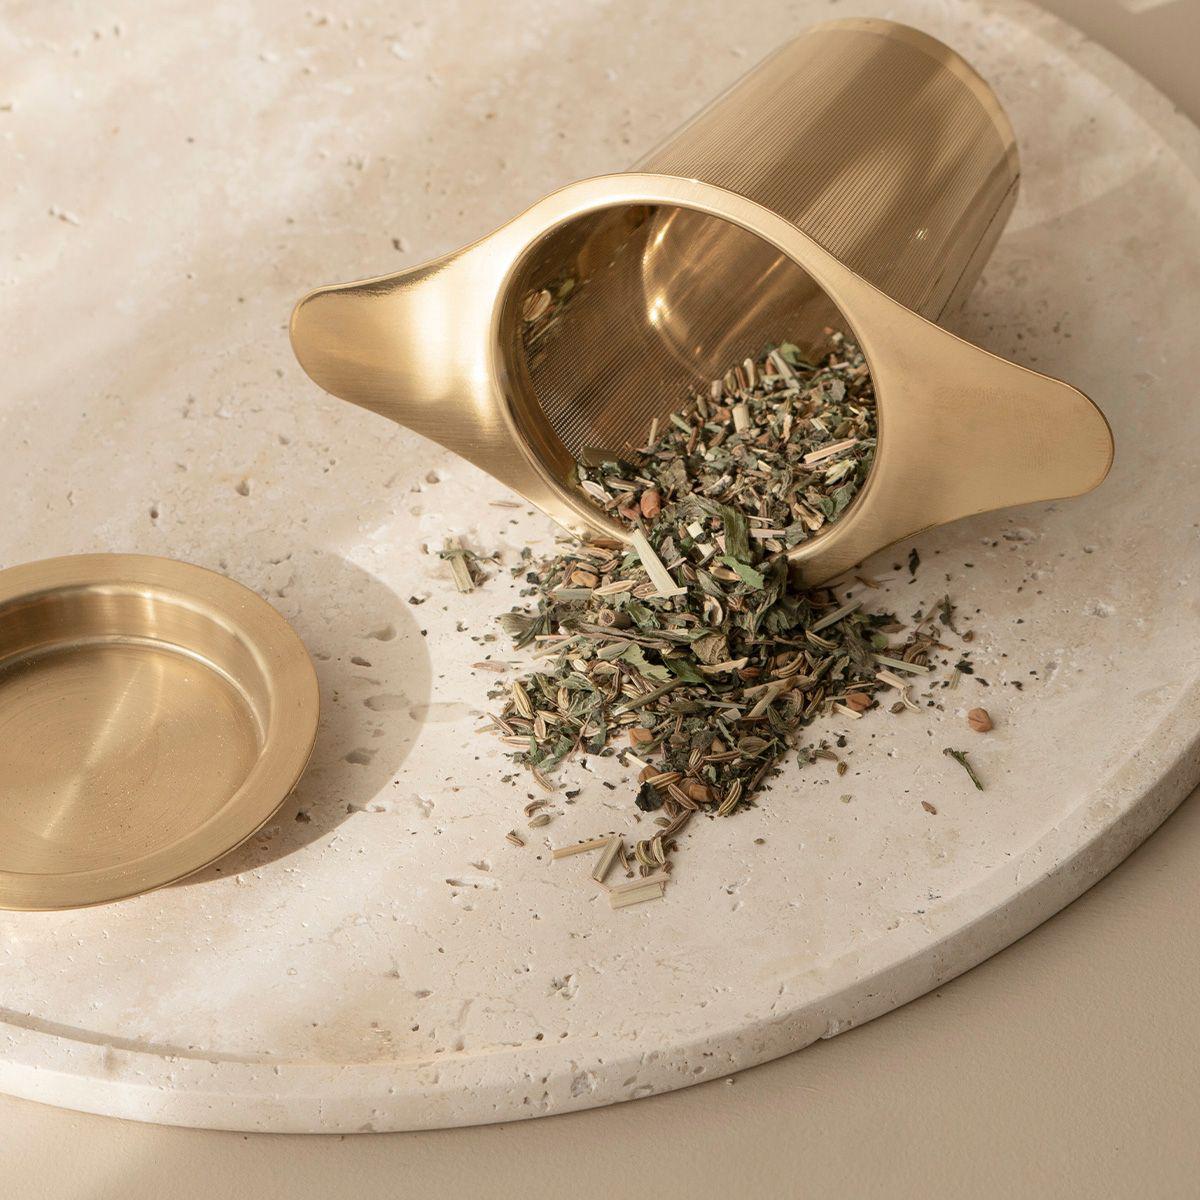 A breastfeeding ritual infusion tea combining herbs for breast care and nursing on a marble tray.